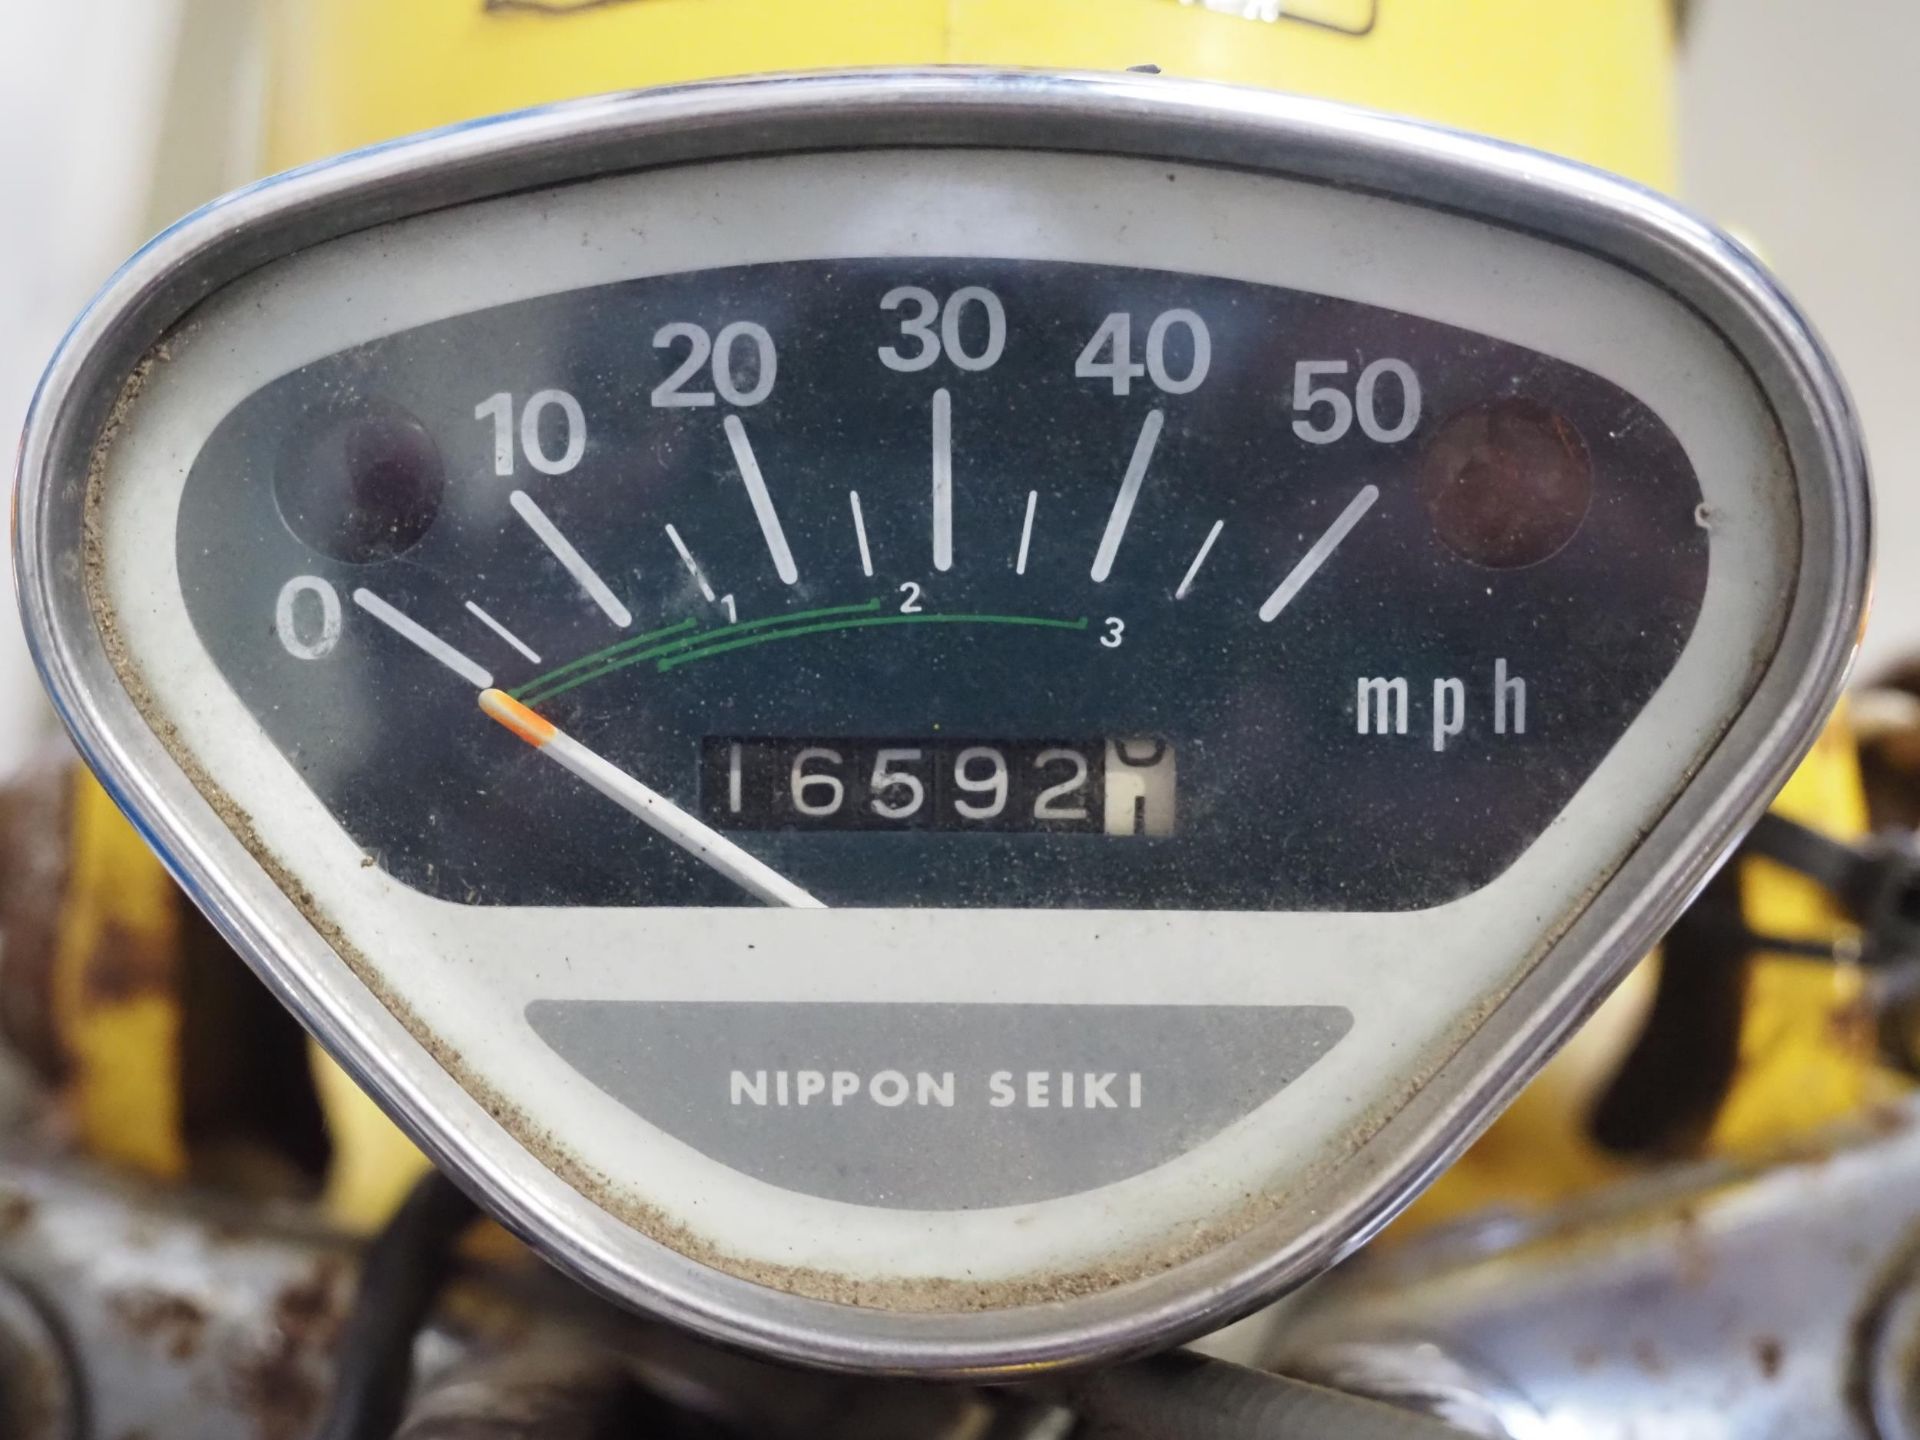 Honda Chaly moped with CWR engine. 125cc. Engine turns over with compression. Reg. KAN 524P. - Image 2 of 4